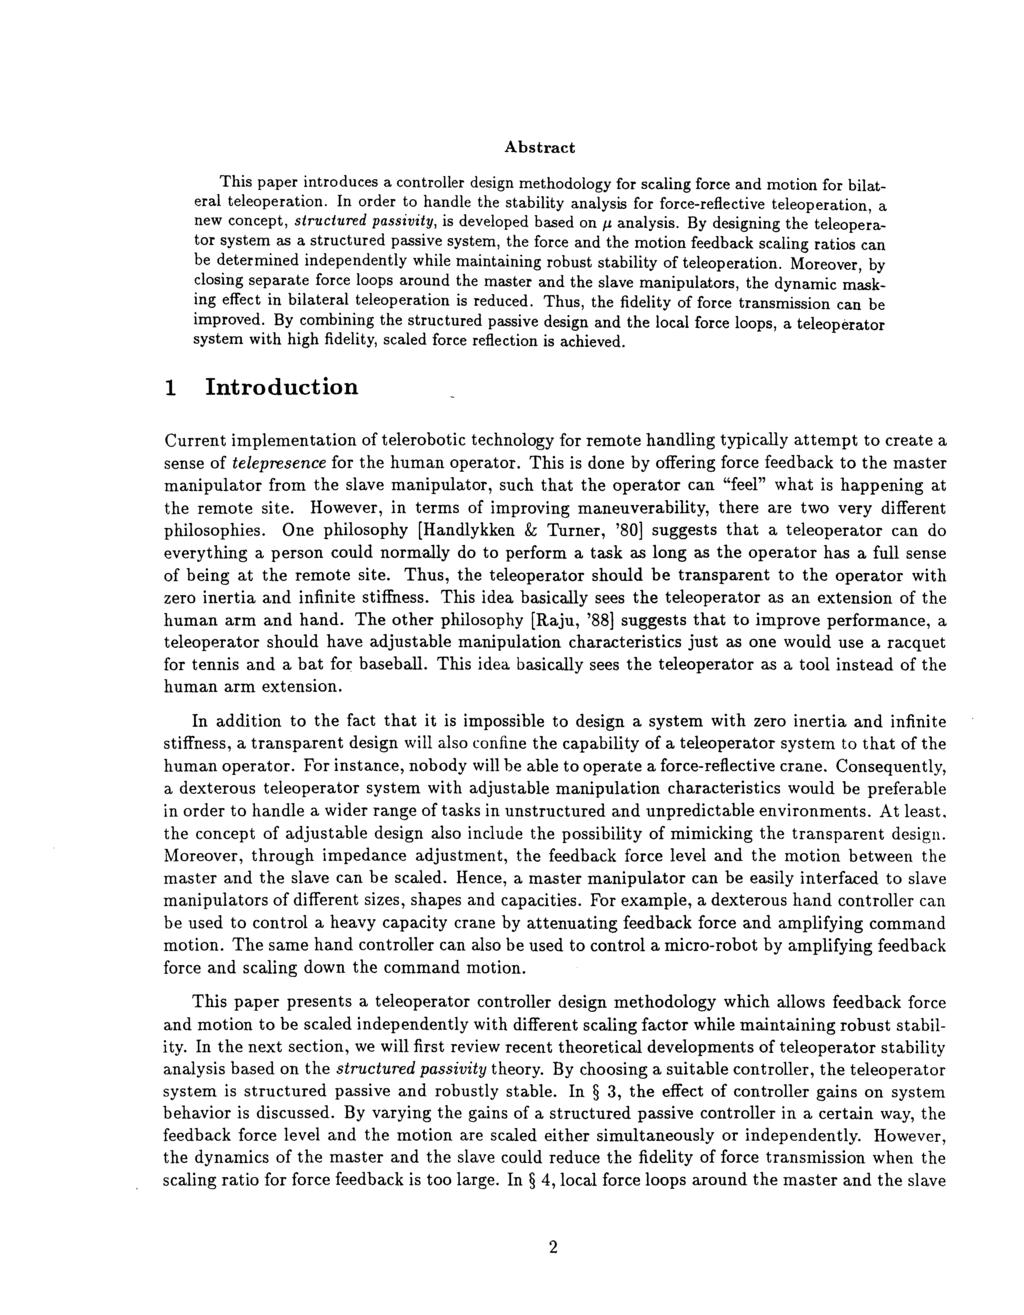 Abstract This paper introduces a controller design methodology for scaling force and motion for bilateral teleoperation.